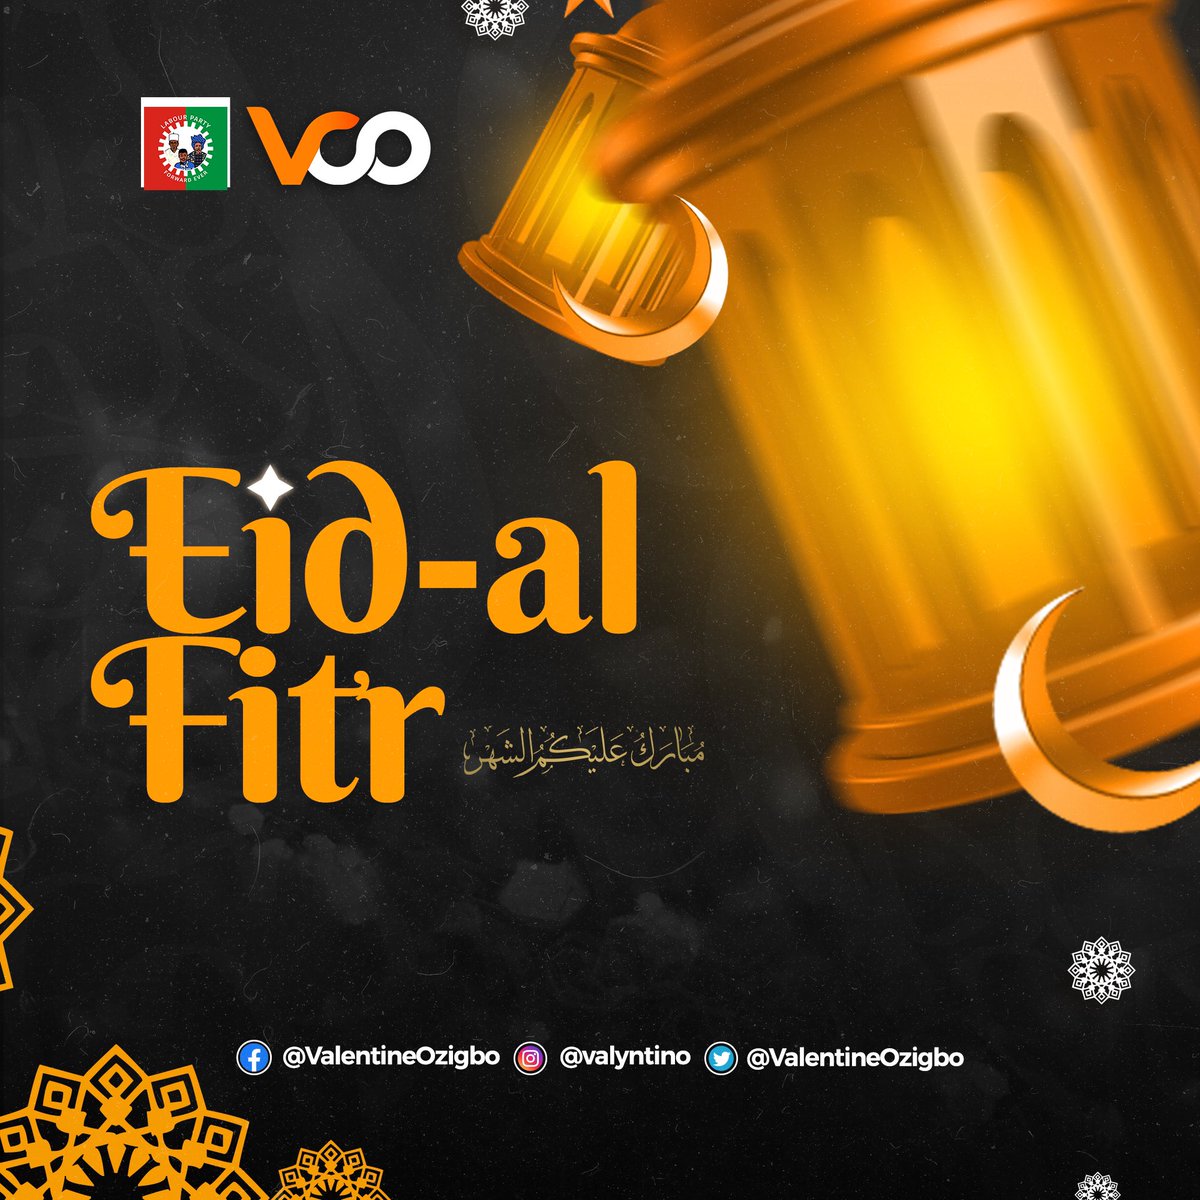 May this Eid be filled with joy and happiness. May Allah crown all your efforts with prosperity. Eid Mubarak to the Muslim community in Nigeria. VCO cares. #EidAlFitr #EidMubarak #VCO